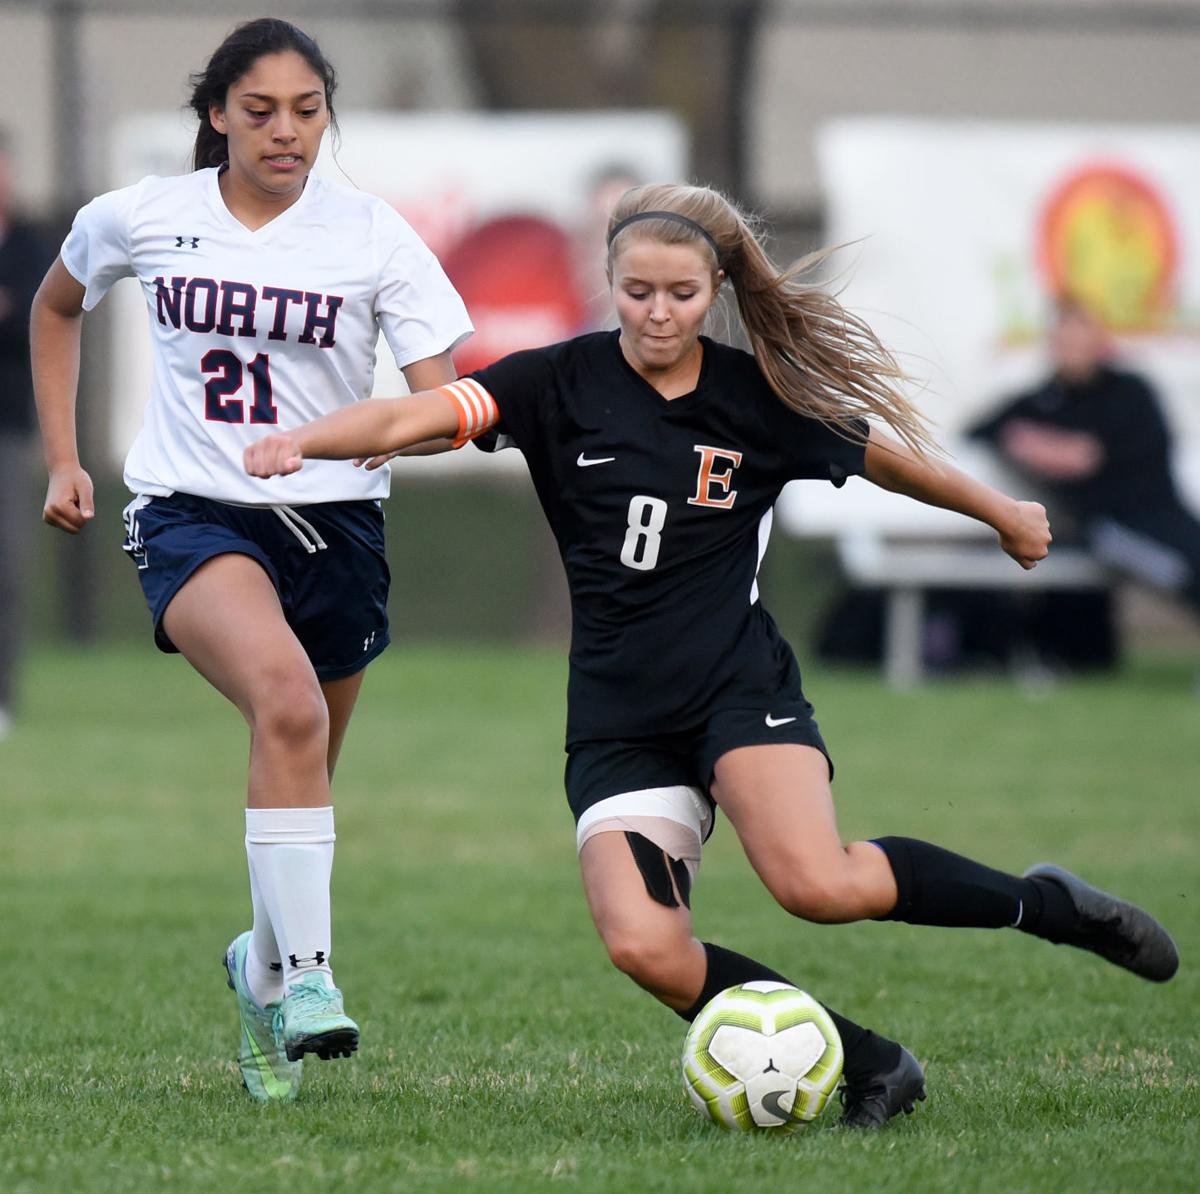 North soccer beats East on Hailee Enoch's game-winning goal | High ...